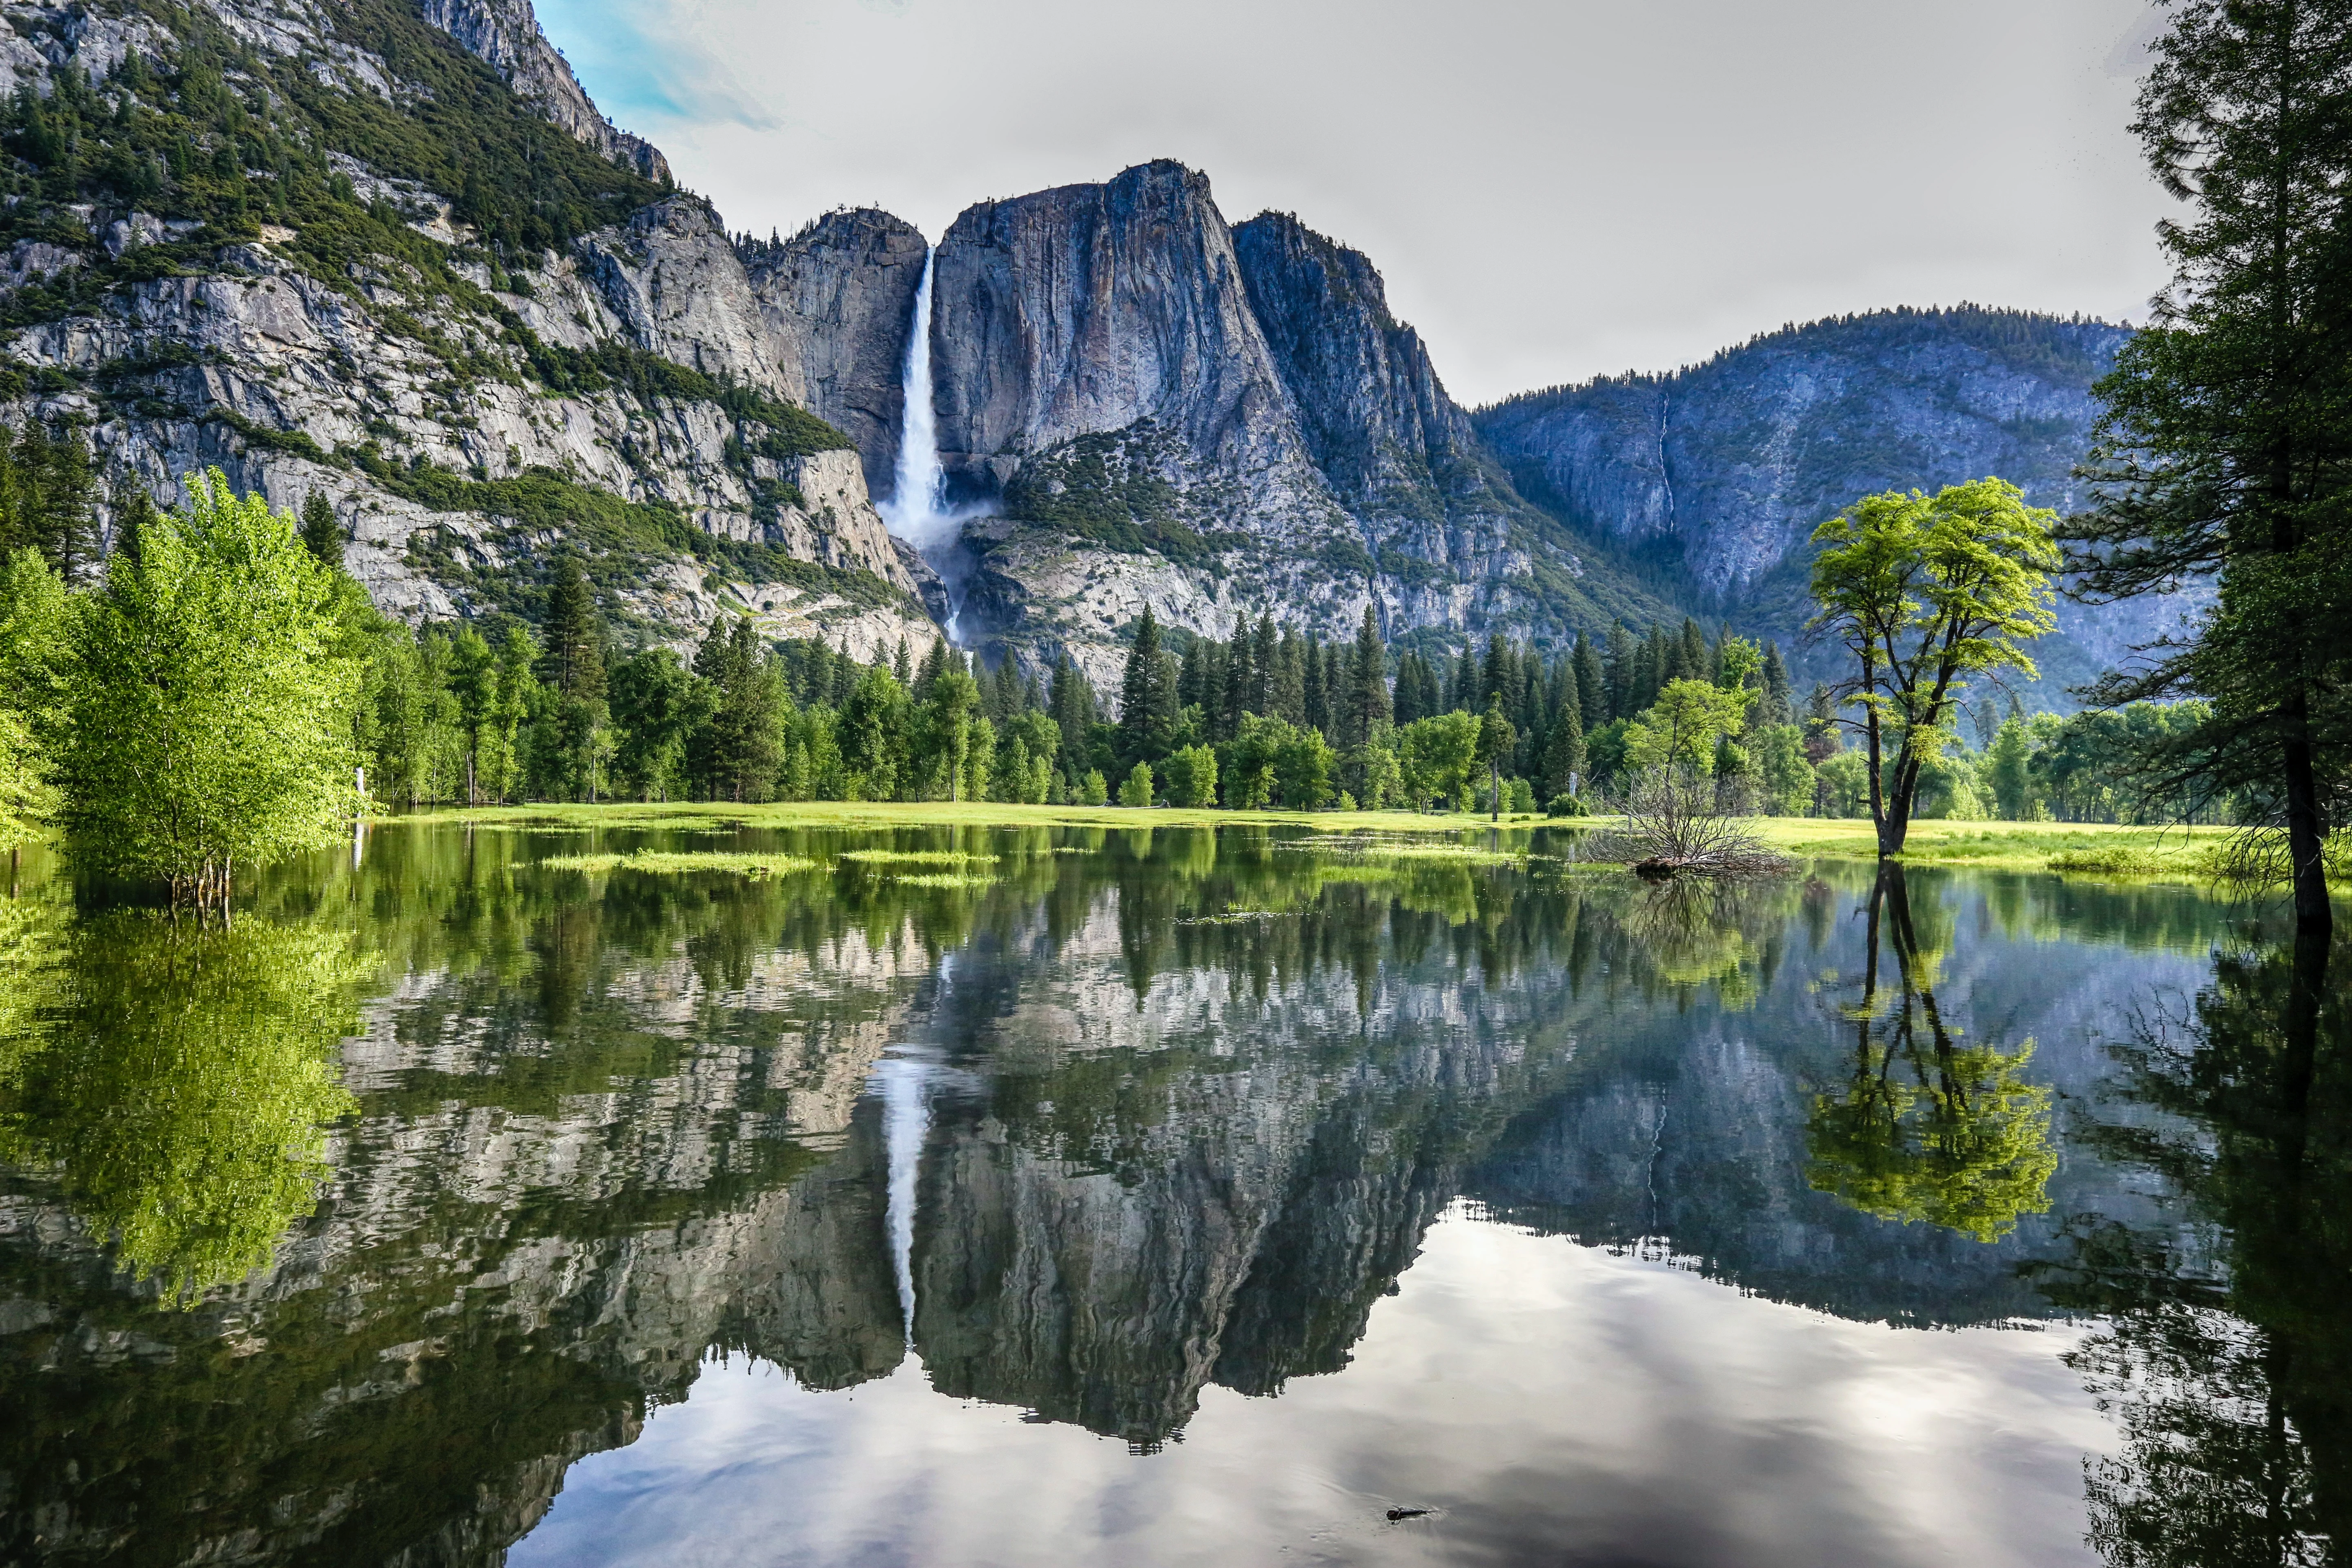 Whether you're a seasoned hiker or a first-time visitor, this article will provide you with a step-by-step guide on how to plan an epic Yosemite trip.